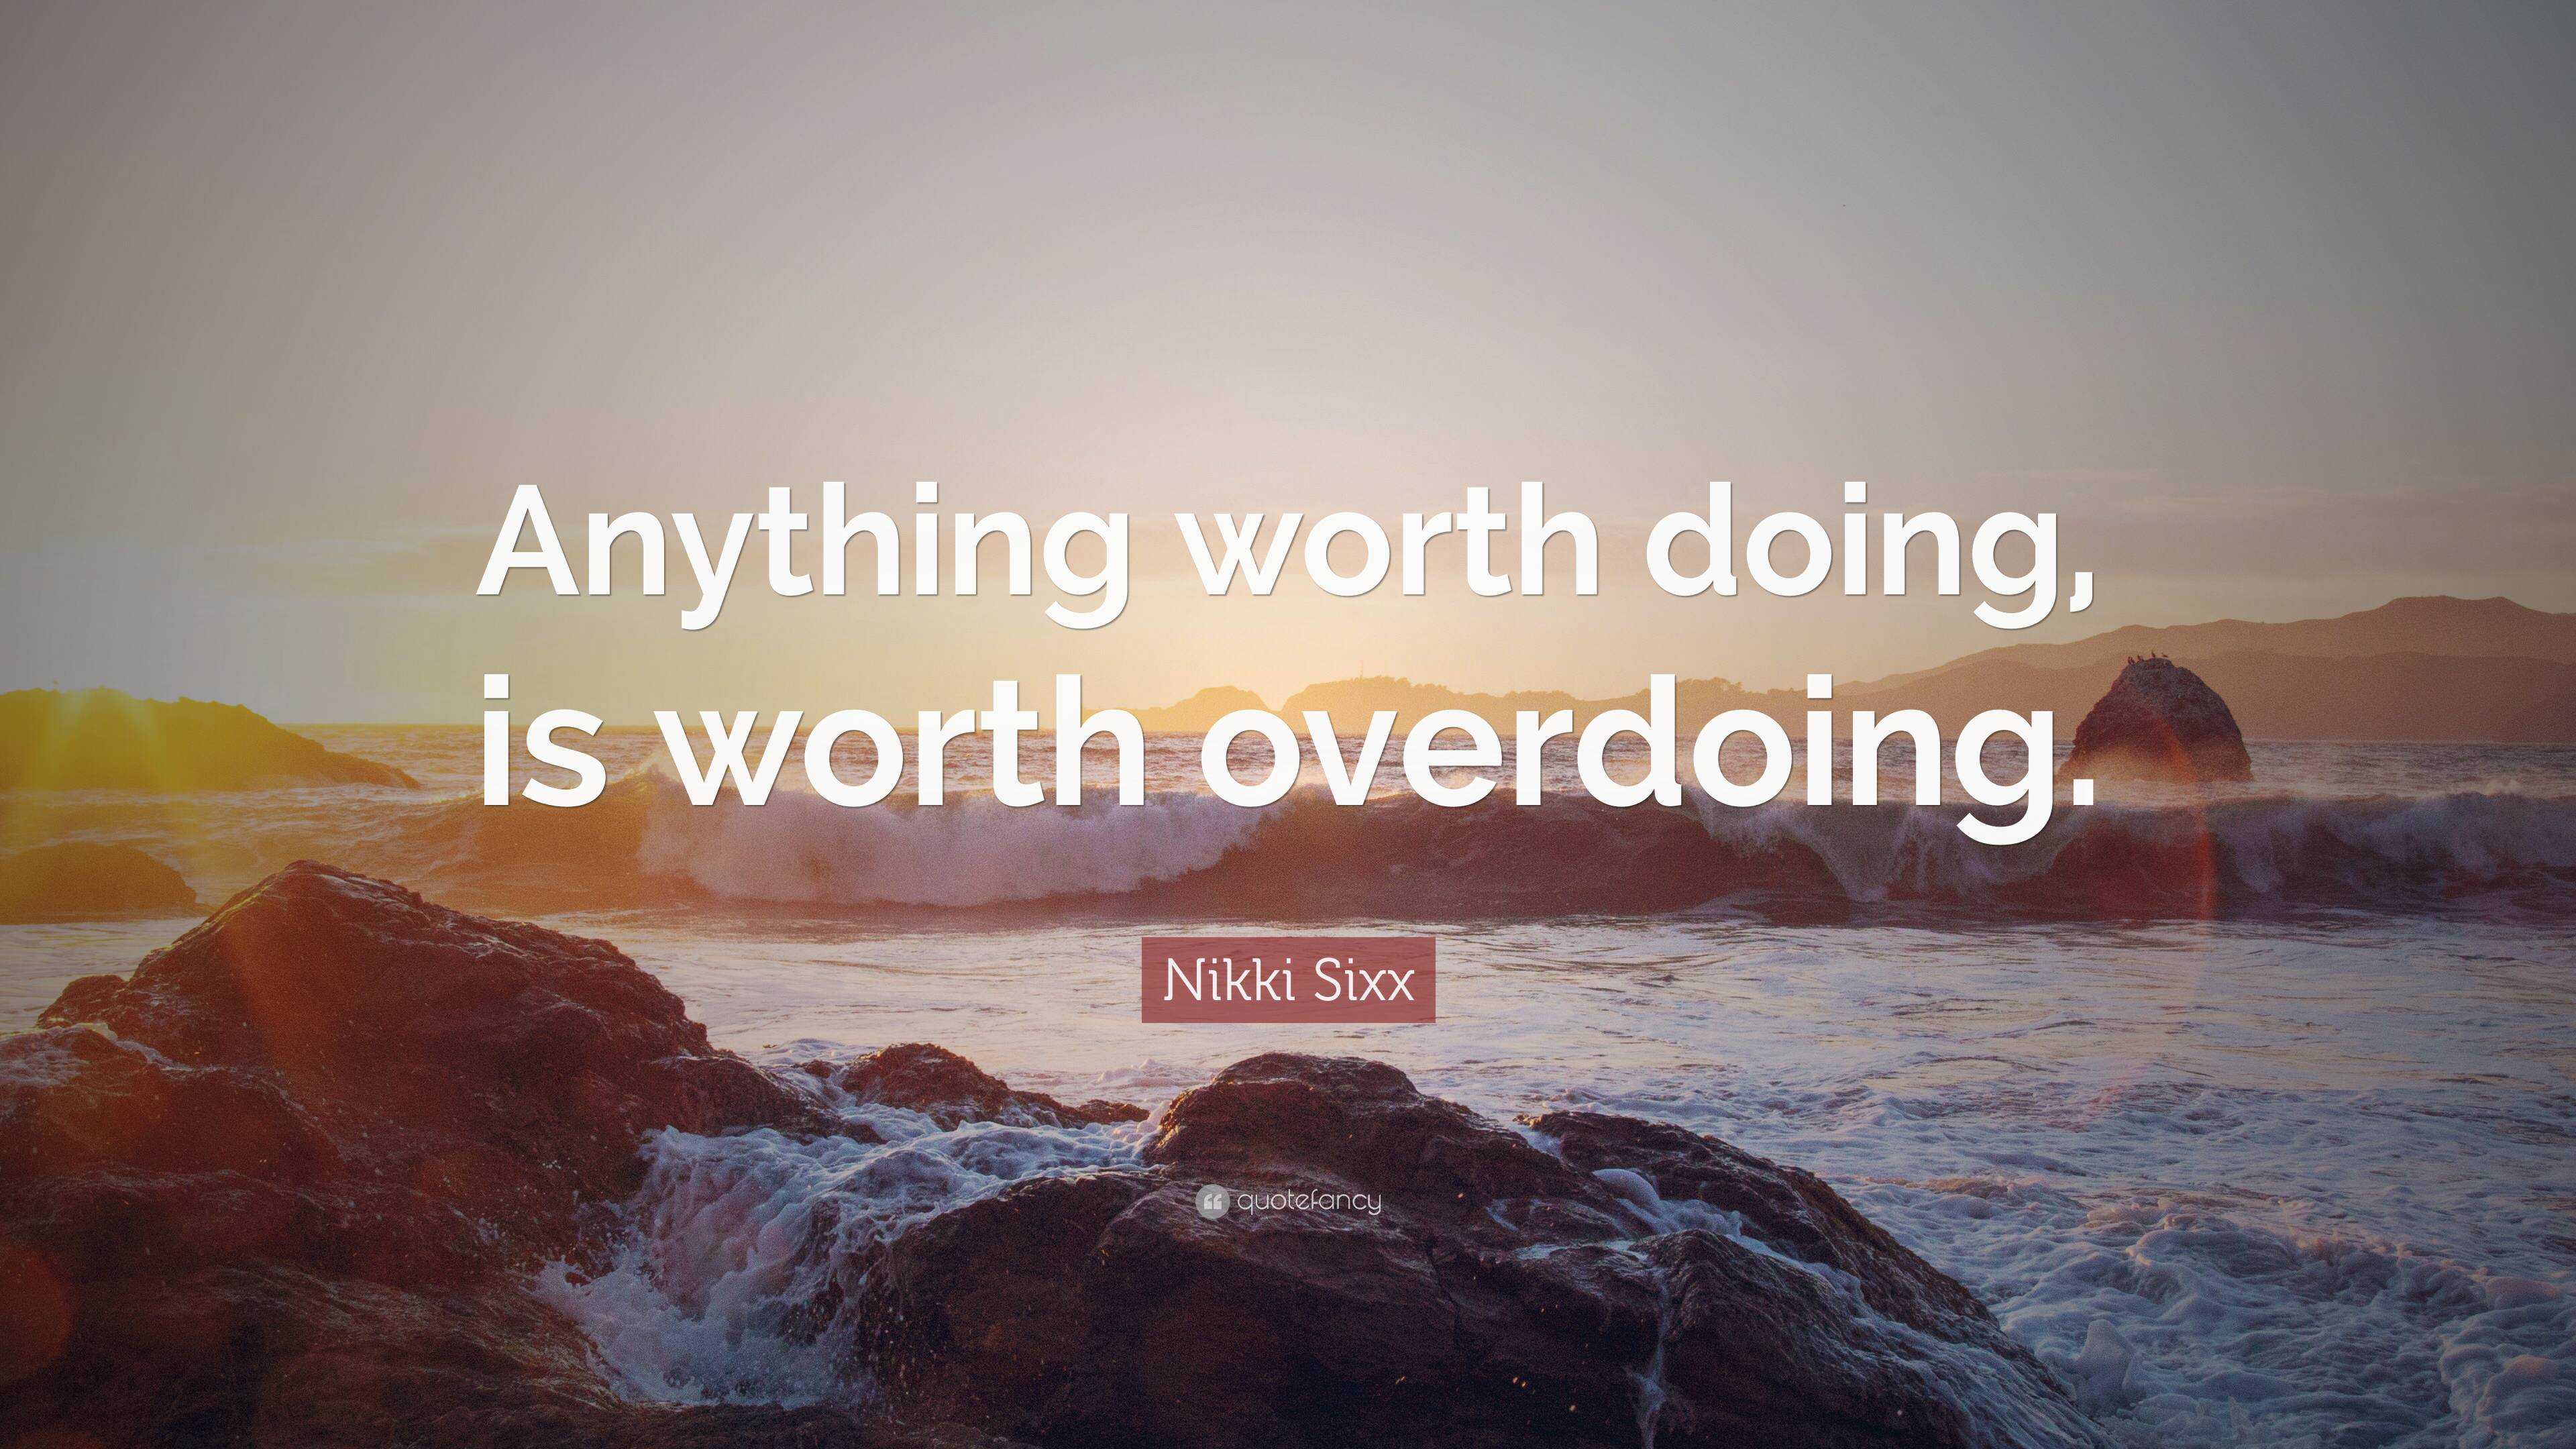 Nikki Sixx Quote: “Anything worth doing, is worth overdoing.”